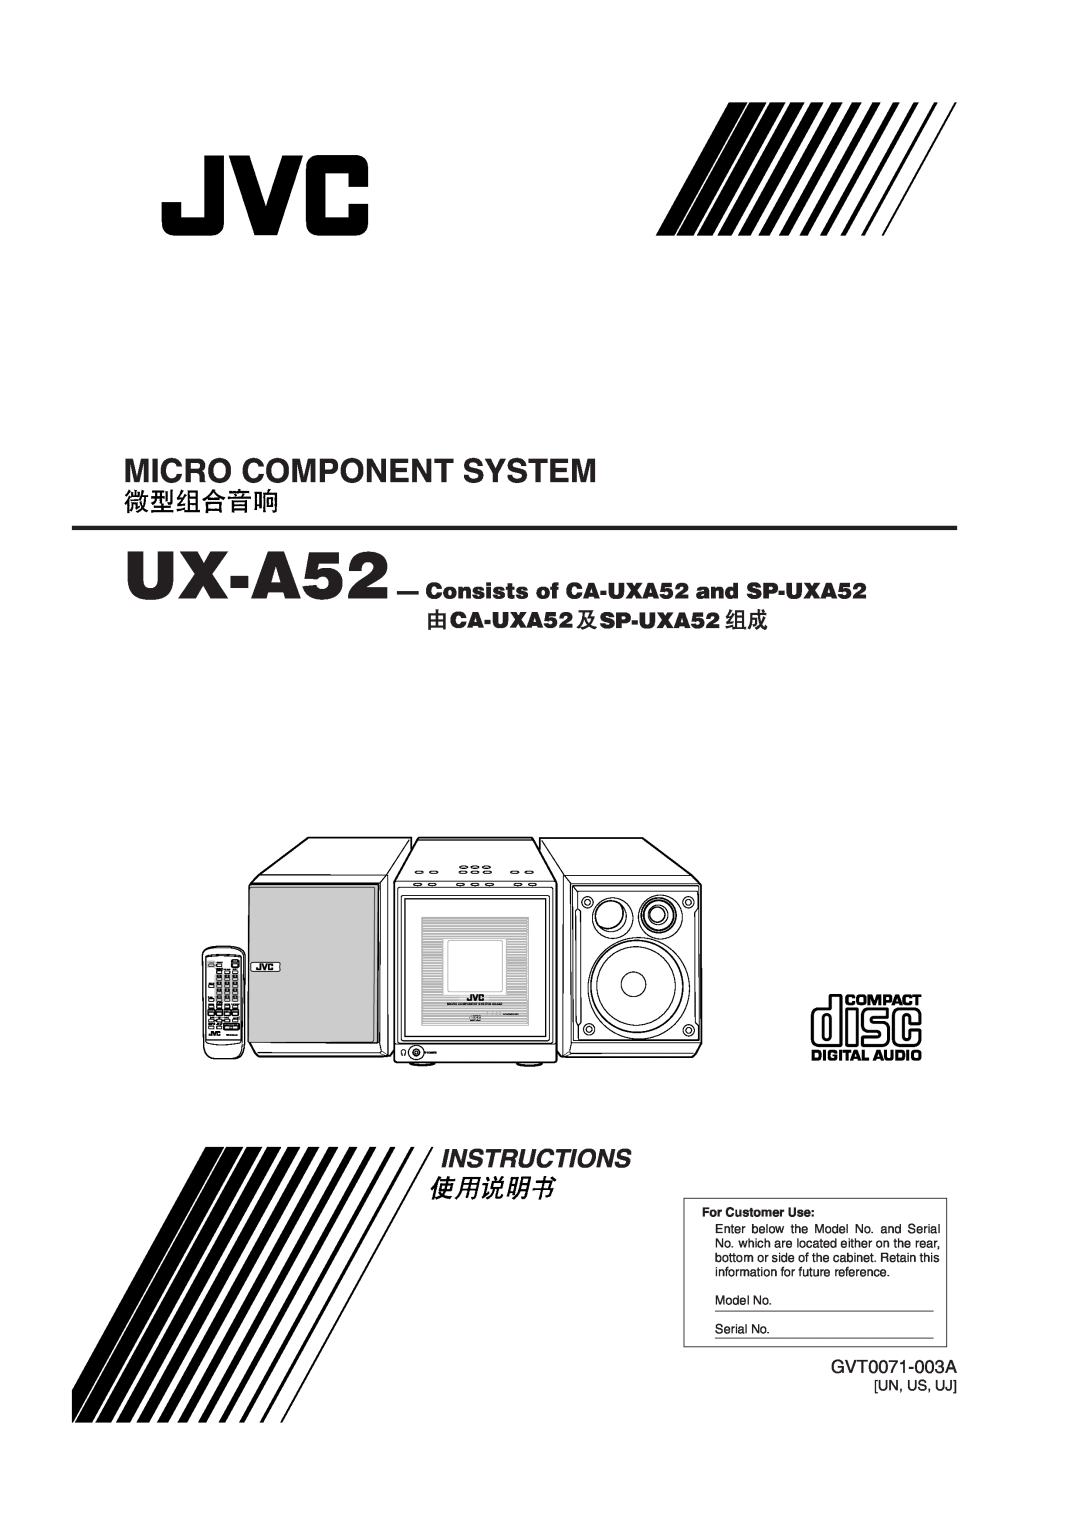 JVC manual Micro Component System, Instructions, UX-A52 - Consists of CA-UXA52and SP-UXA52, CA-UXA52SP-UXA52, 1 2 